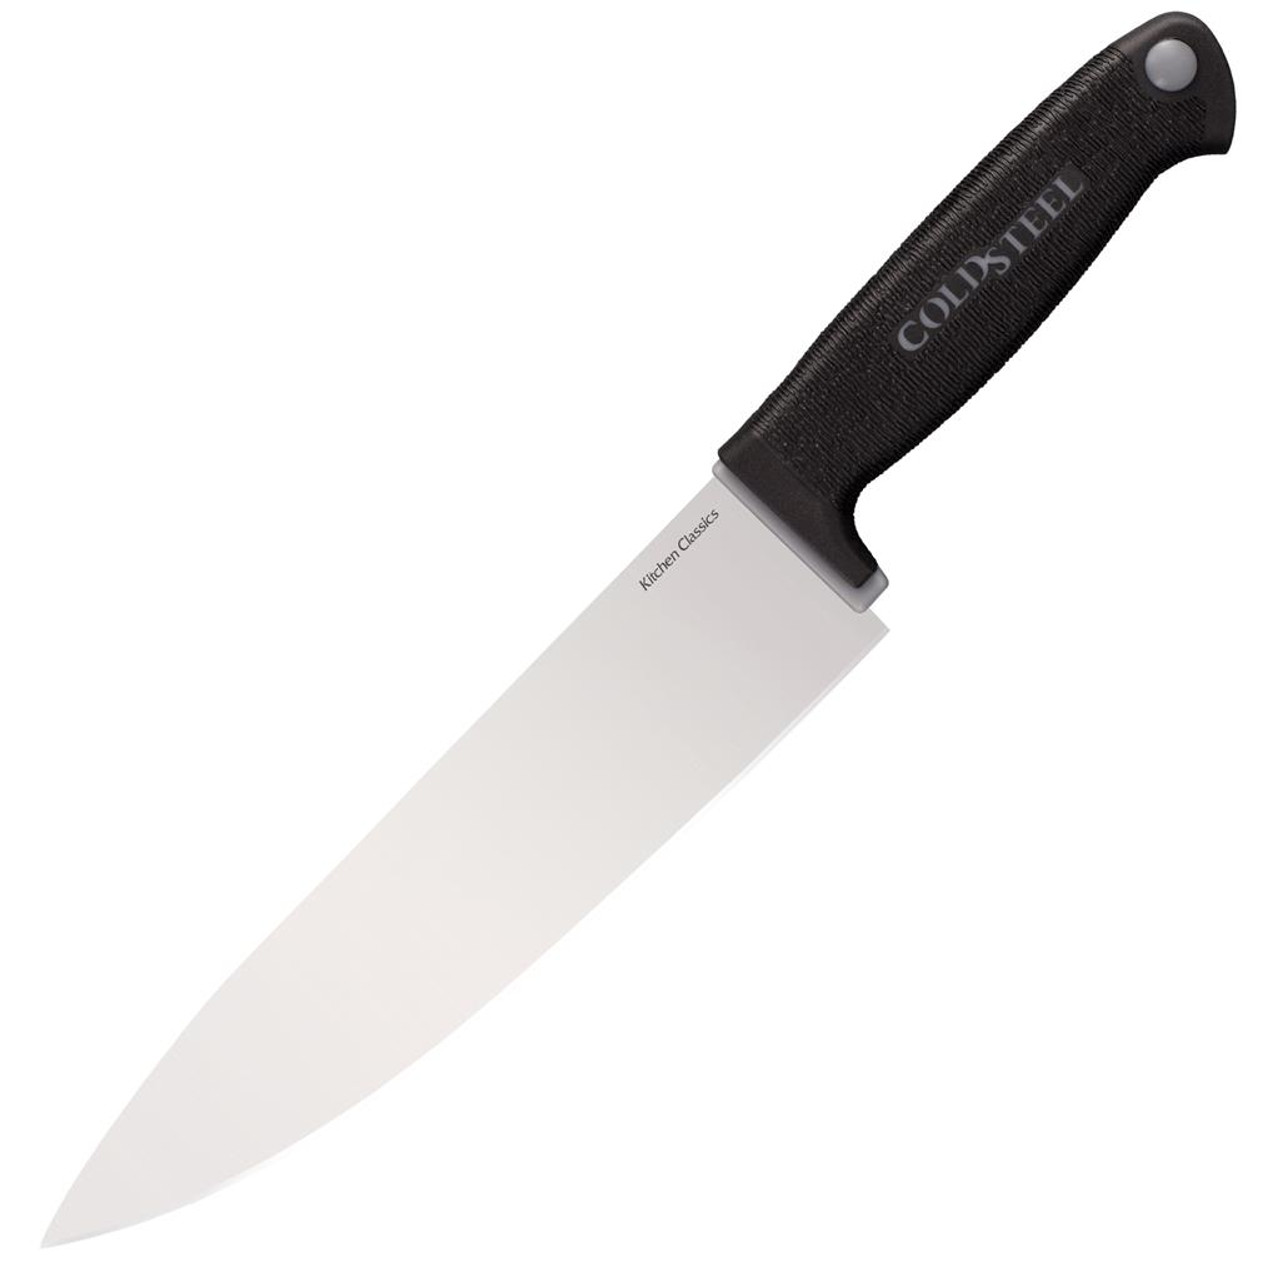 Chef's Knives, Kitchen Cutlery, Knives for Cooking